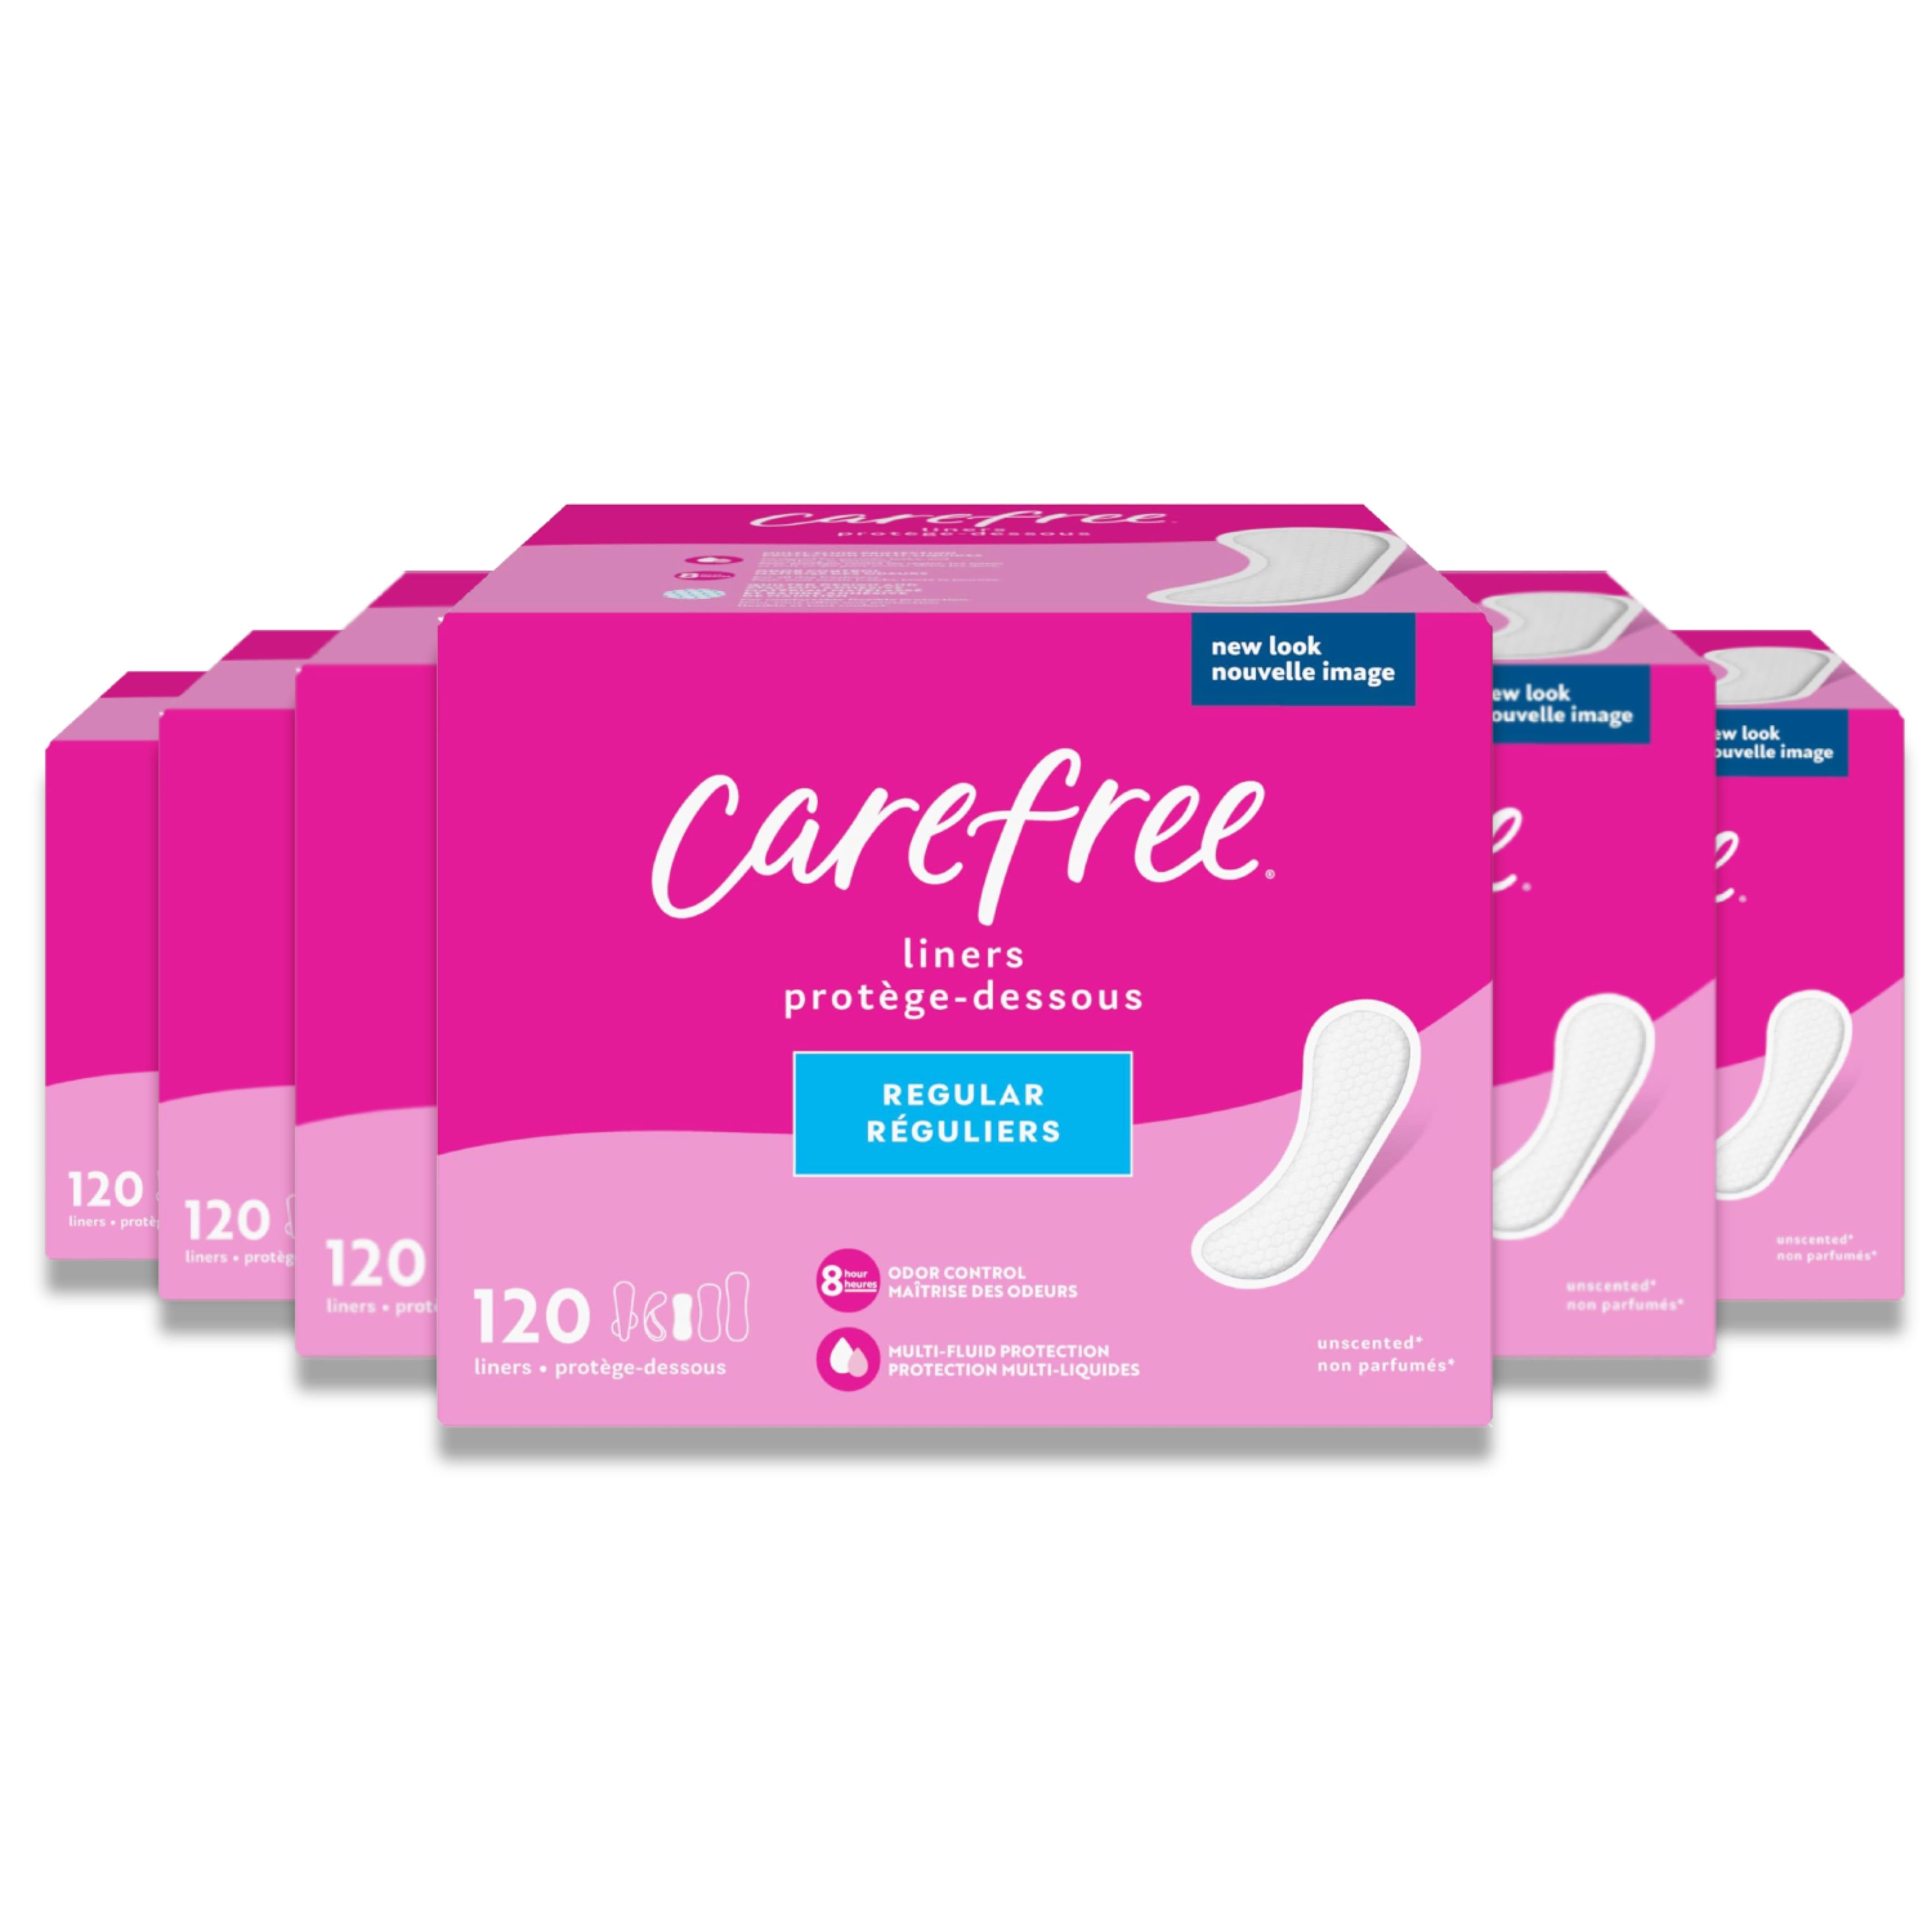 Carefree Acti-Fresh Body Shape Regular To Go Pantiliners - 54 Liners, Pack  of 2